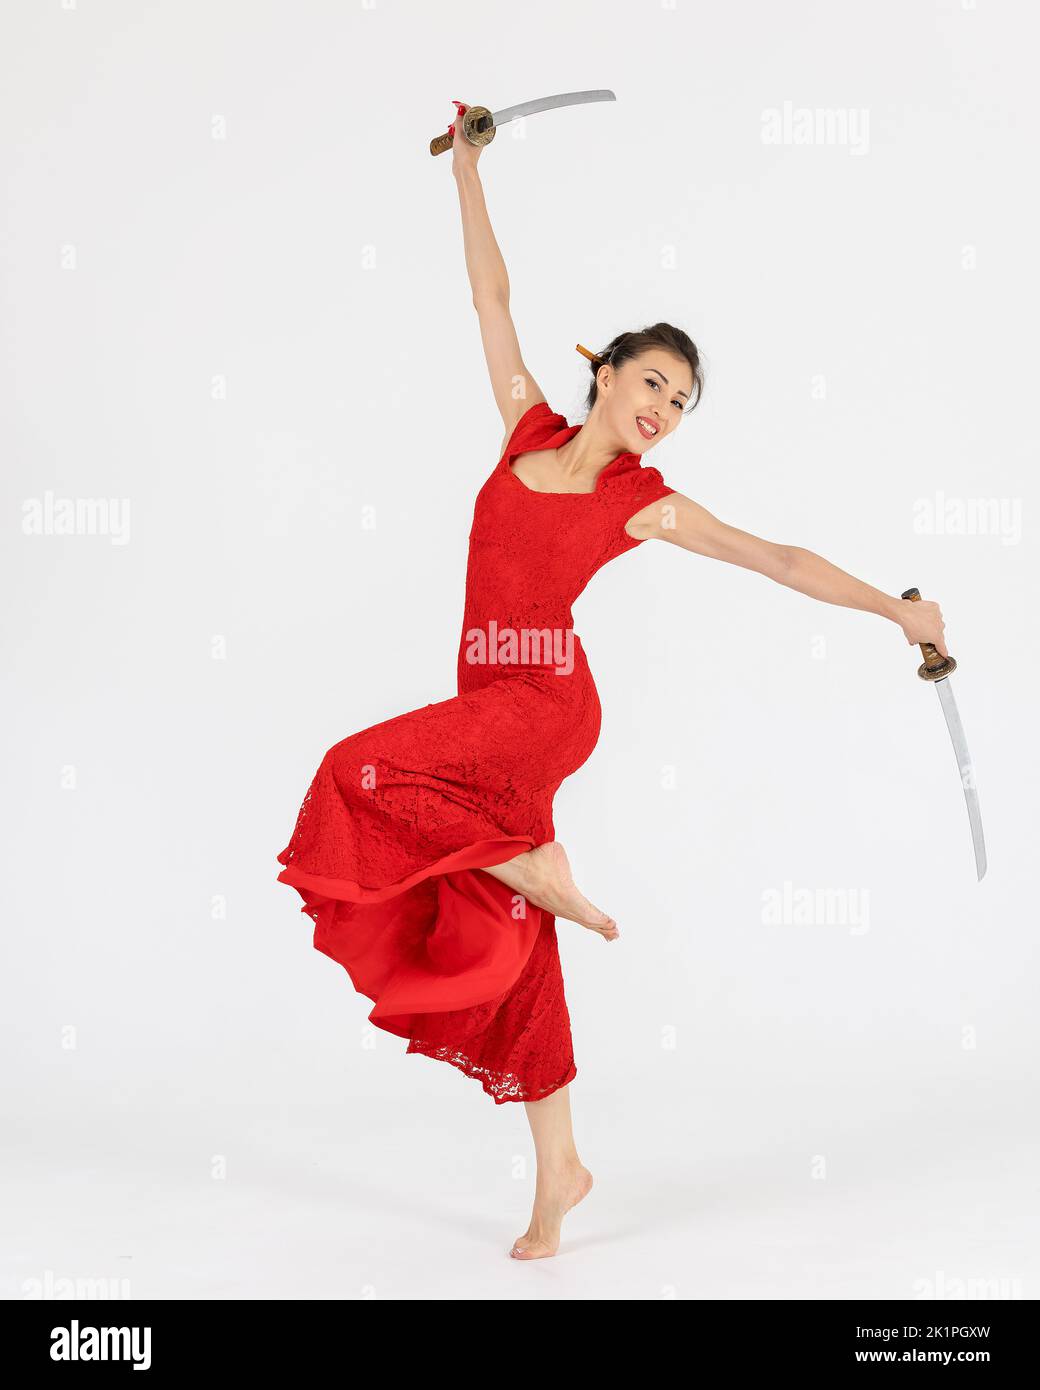 Aikido master woman in red dress with sword, katana on white background. Healthy lifestyle and sports concept. Stock Photo